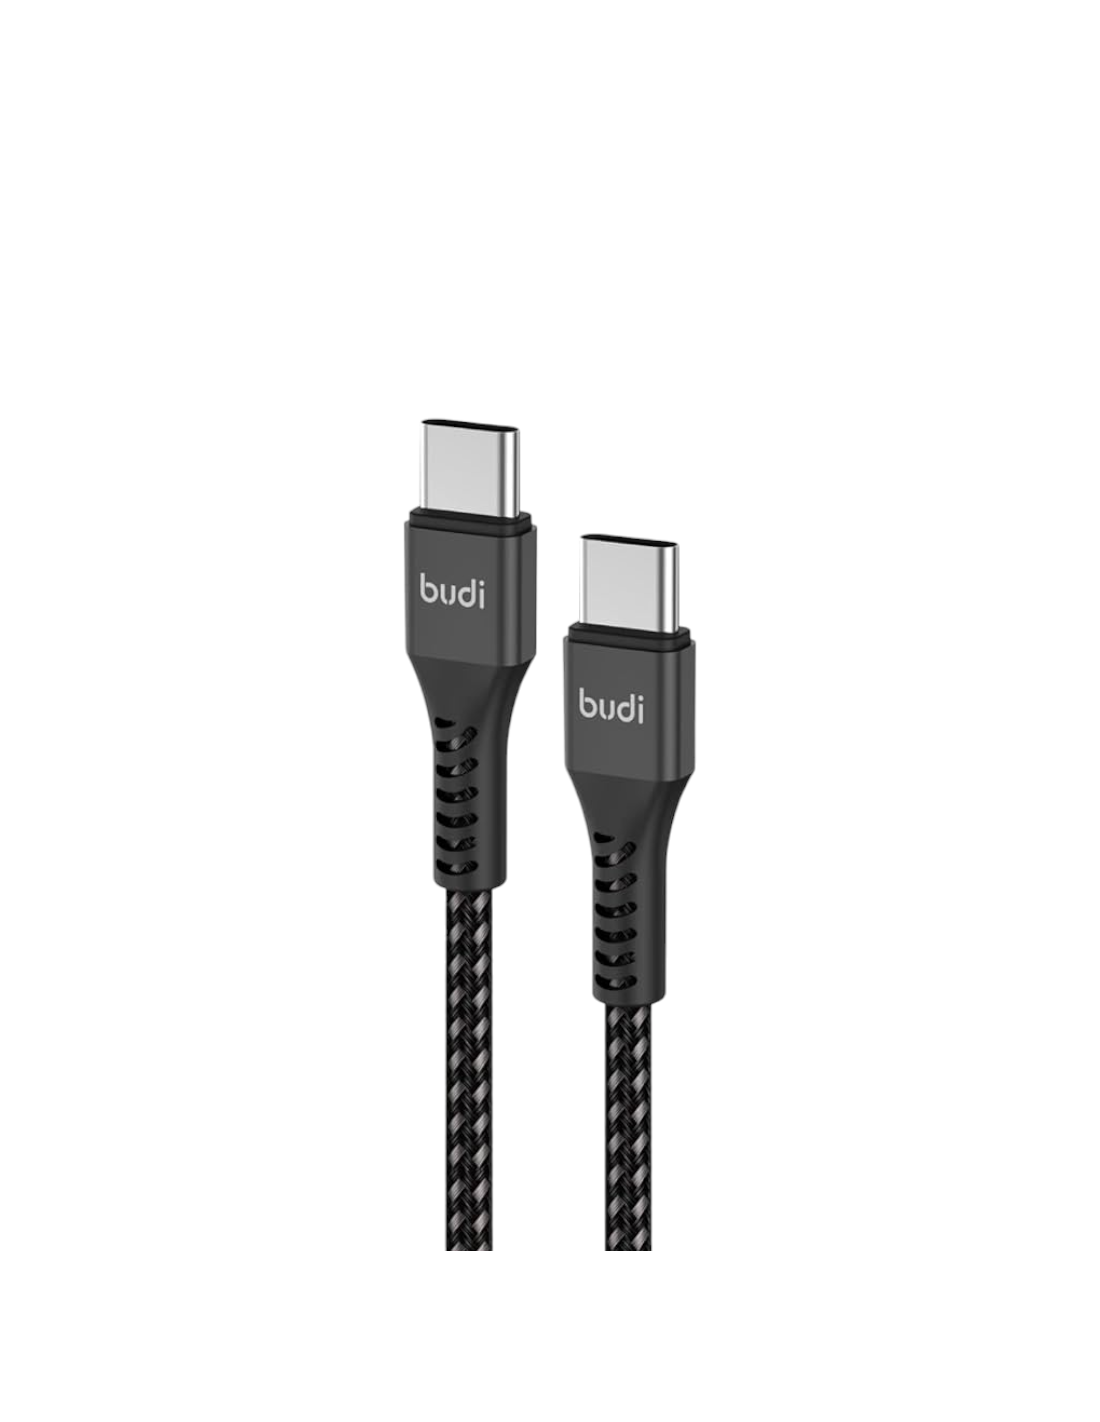 https://high-techstore.com/8118-thickbox_default/cable-charge-rapide-usb-type-c-vers-usb-type-c-pd-65w-budi.jpg